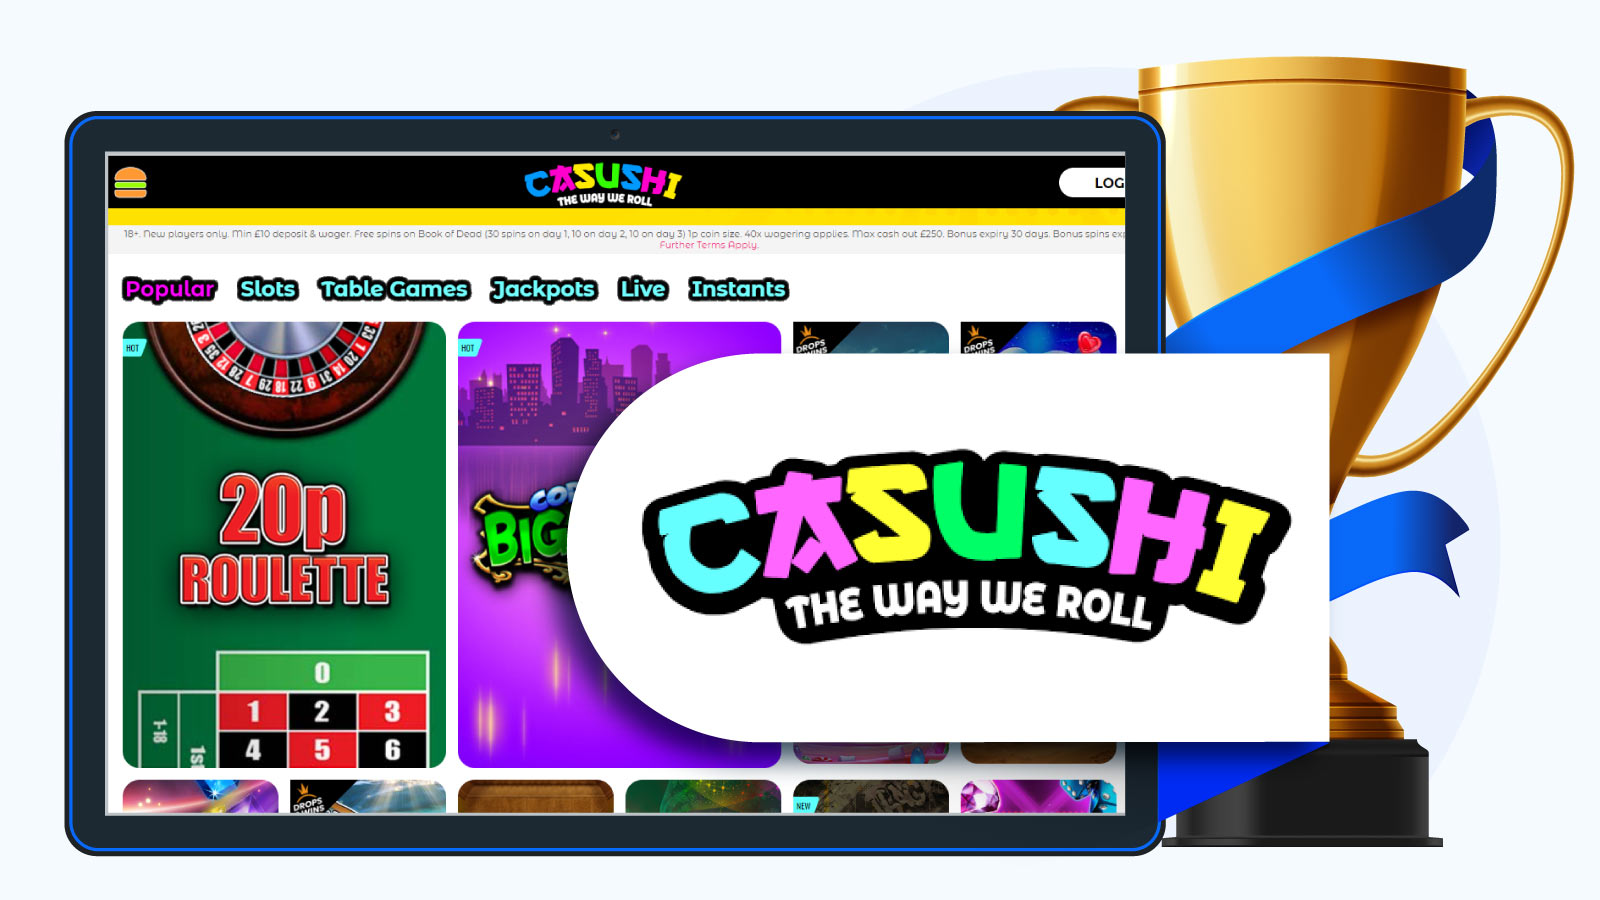 Casushi – Best Fast Payout Casino Overall